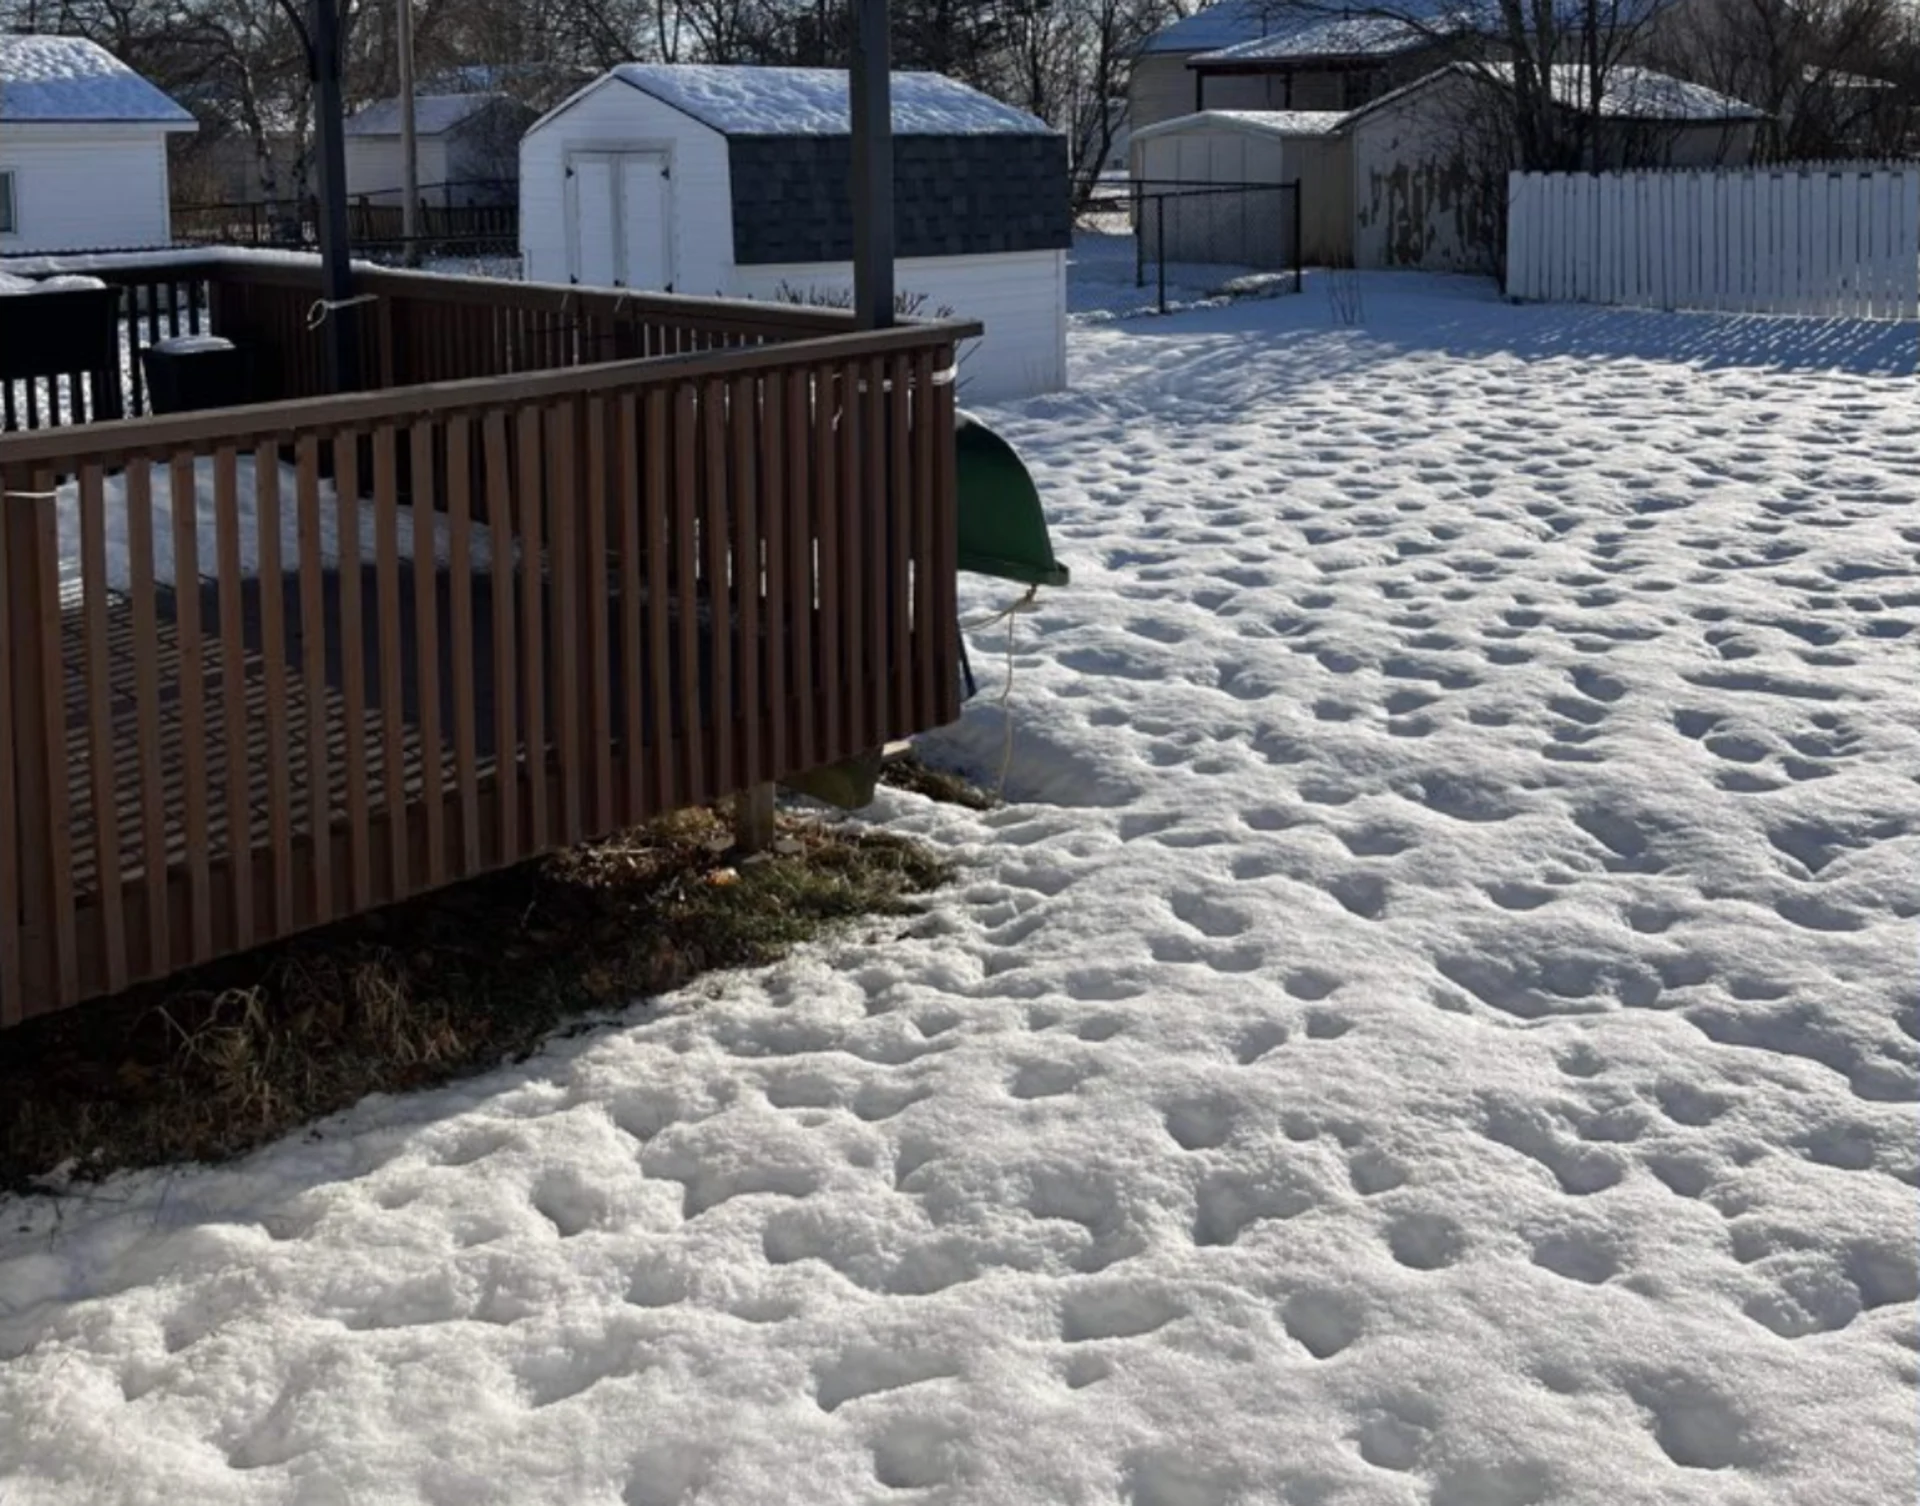 See random 'snow holes' on your lawn? Here's what's causing them